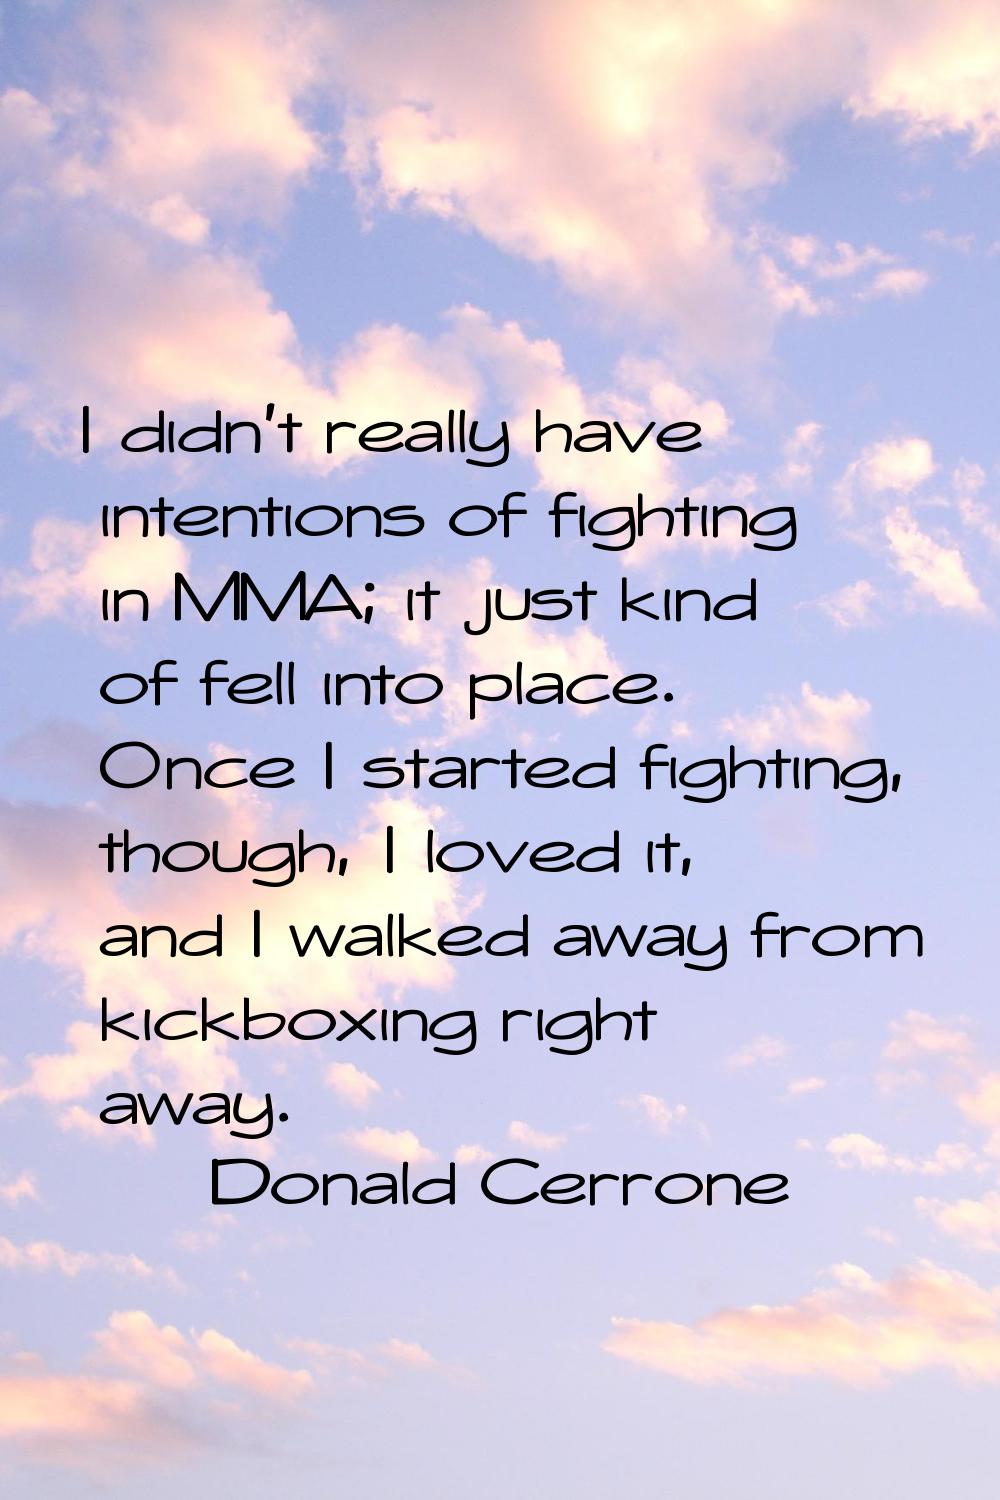 I didn't really have intentions of fighting in MMA; it just kind of fell into place. Once I started